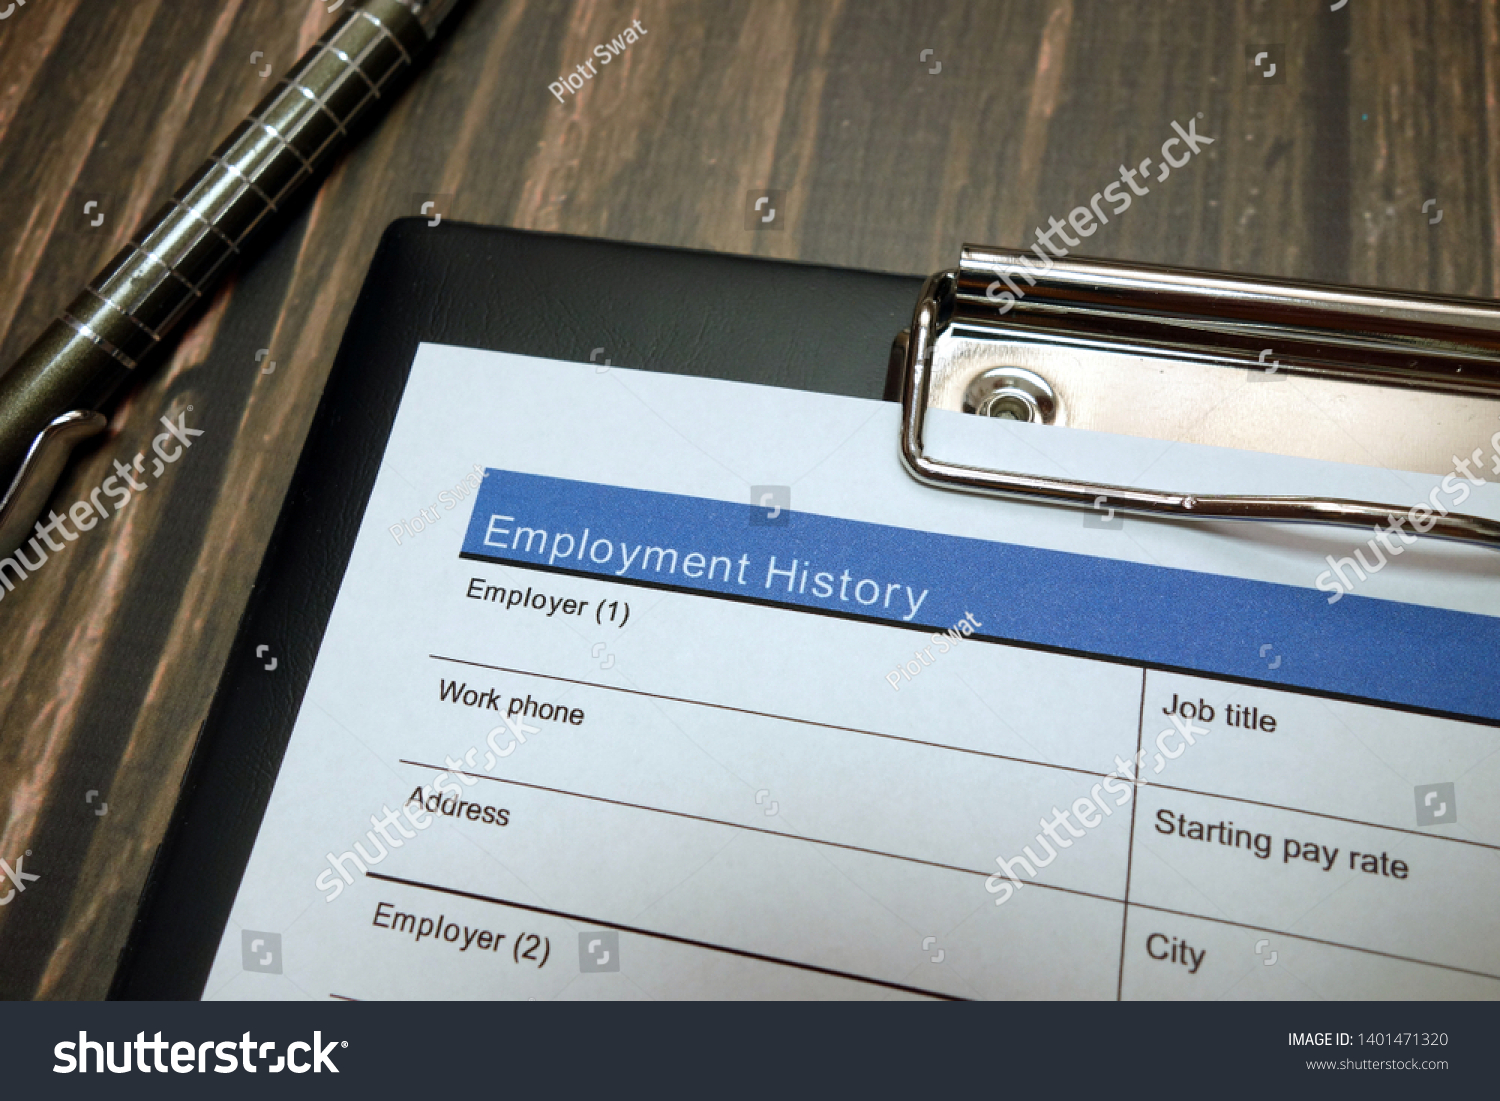 Clipboard with employment history document, job application form #1401471320